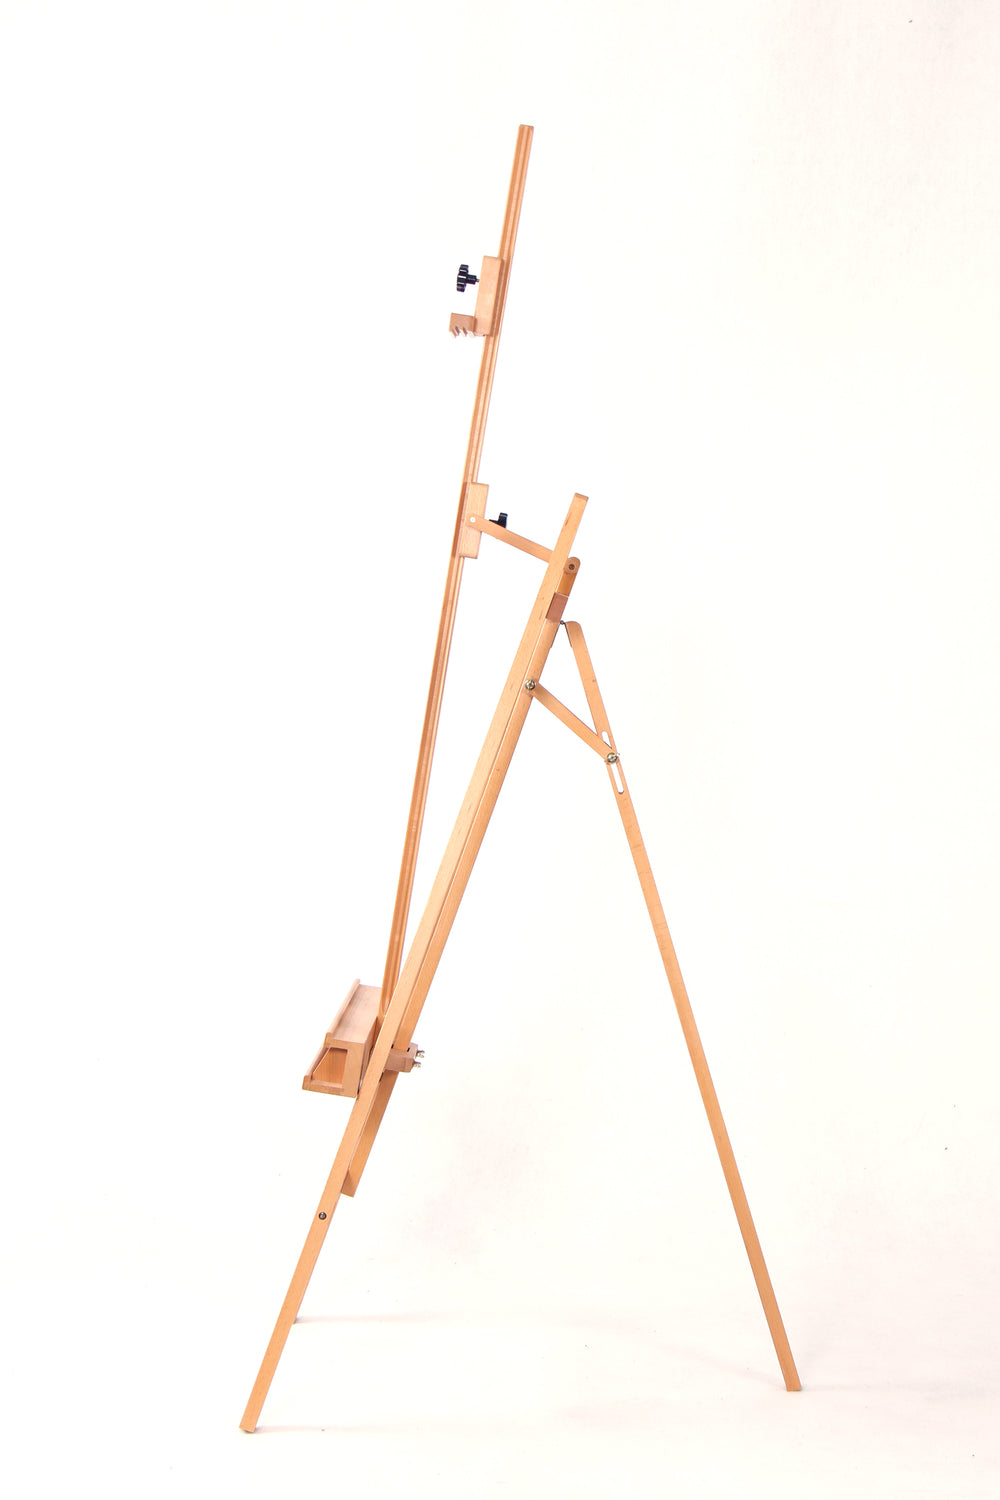 Opus Athabasca Easel